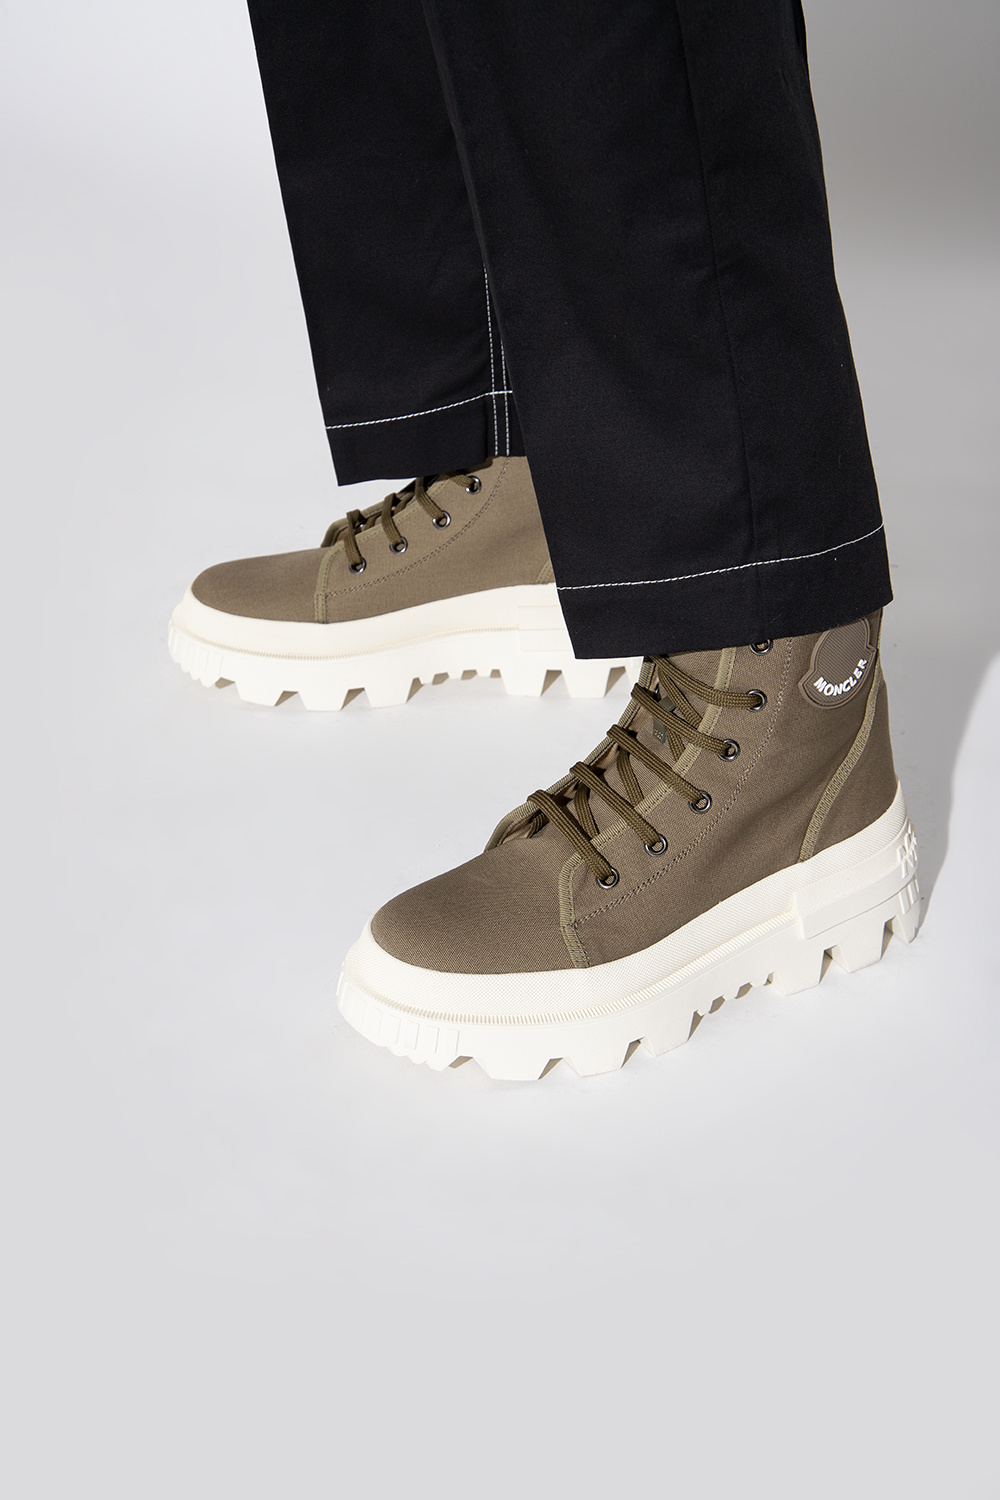 Moncler ‘Desertyx’ ankle boots